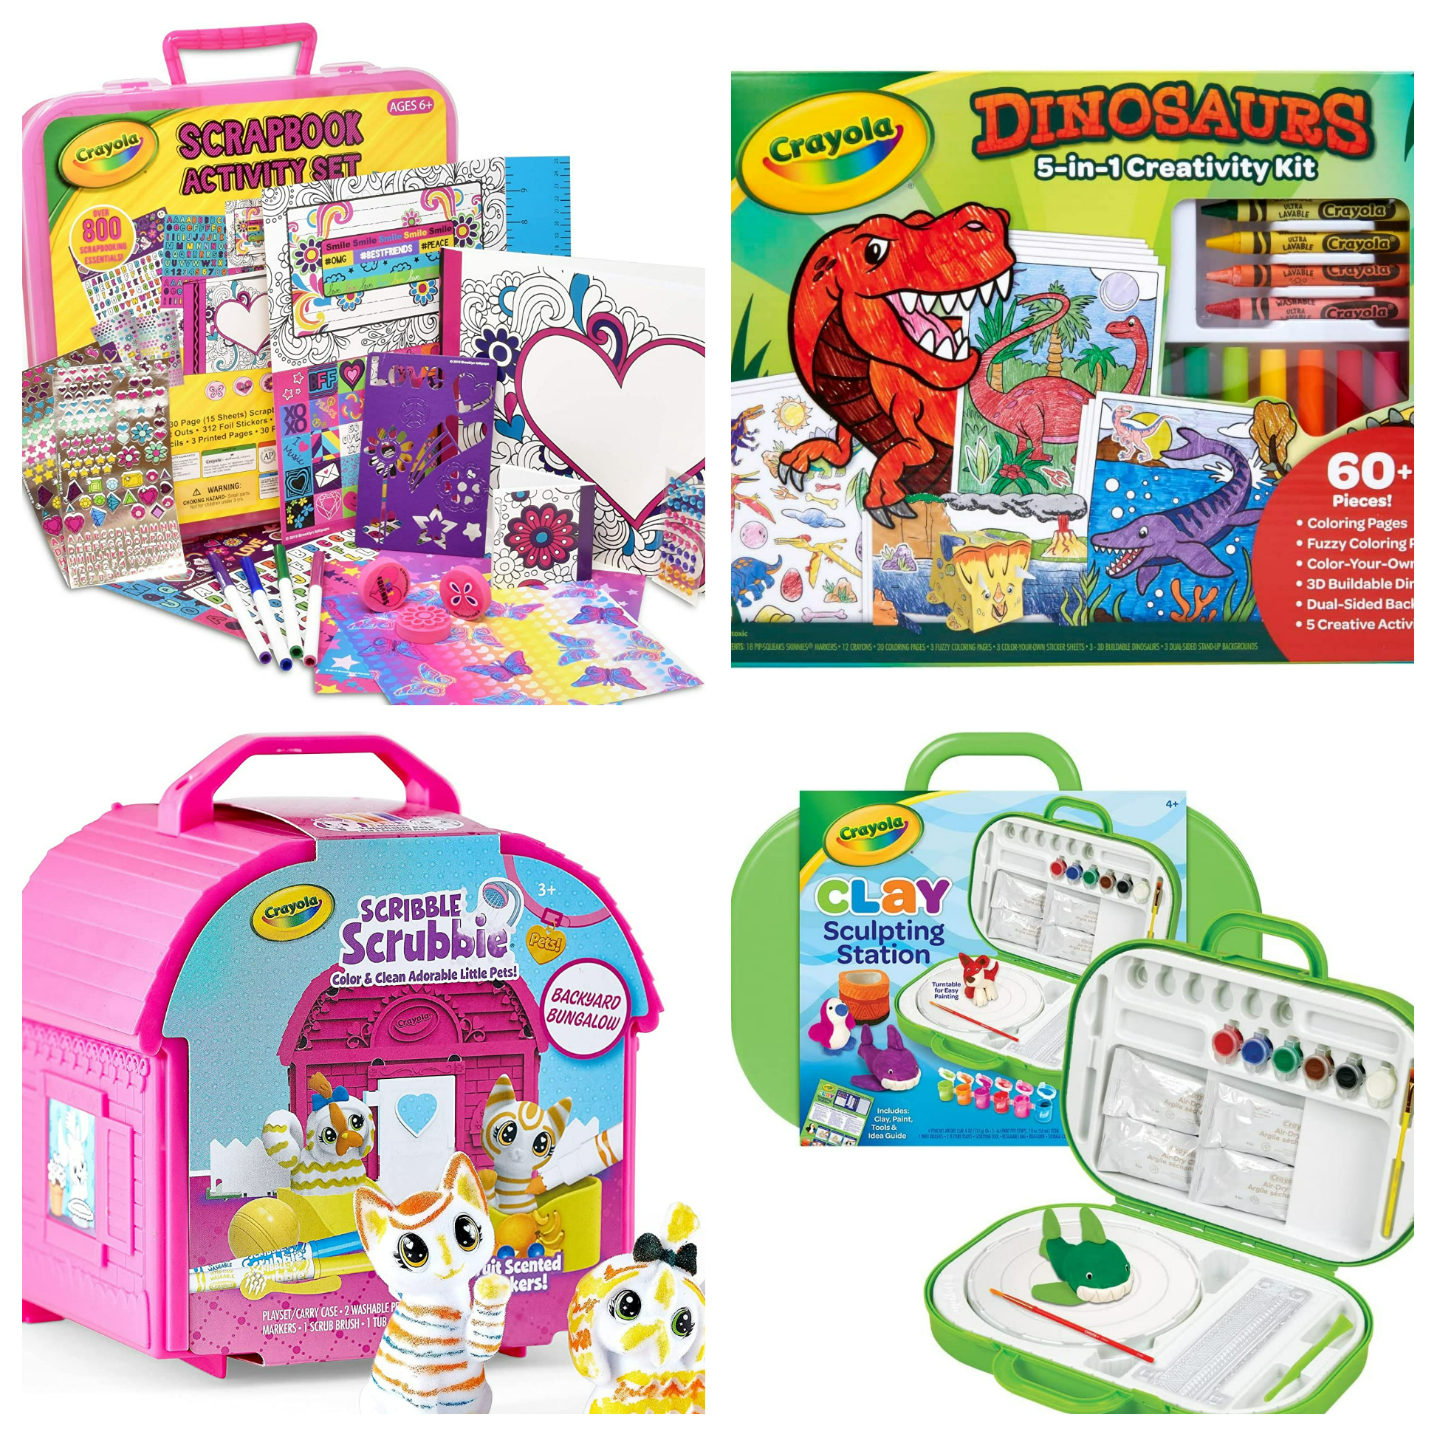 Cross gifts off your list with 's up to 35% Crayola art set